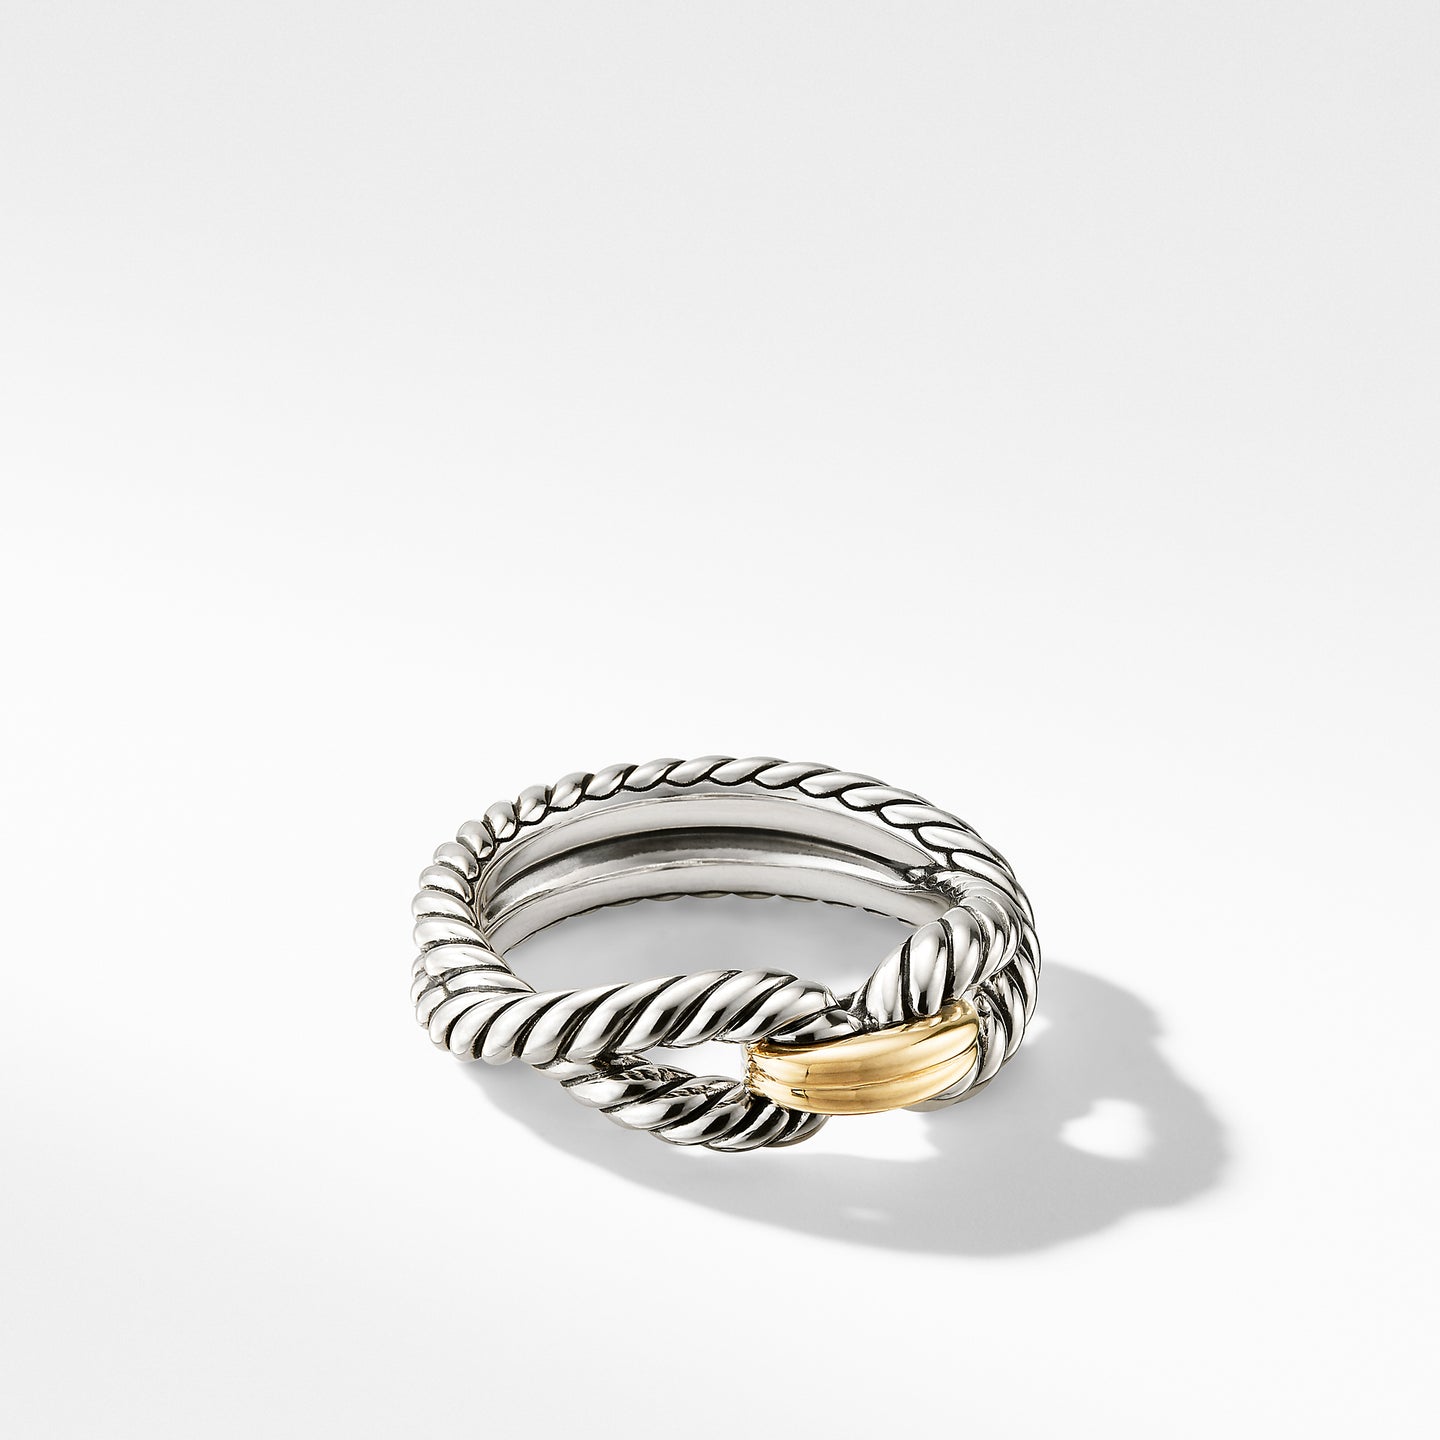 David Yurman The Crossover® Collection Ring in Silver and 18-Karat Yellow Gold